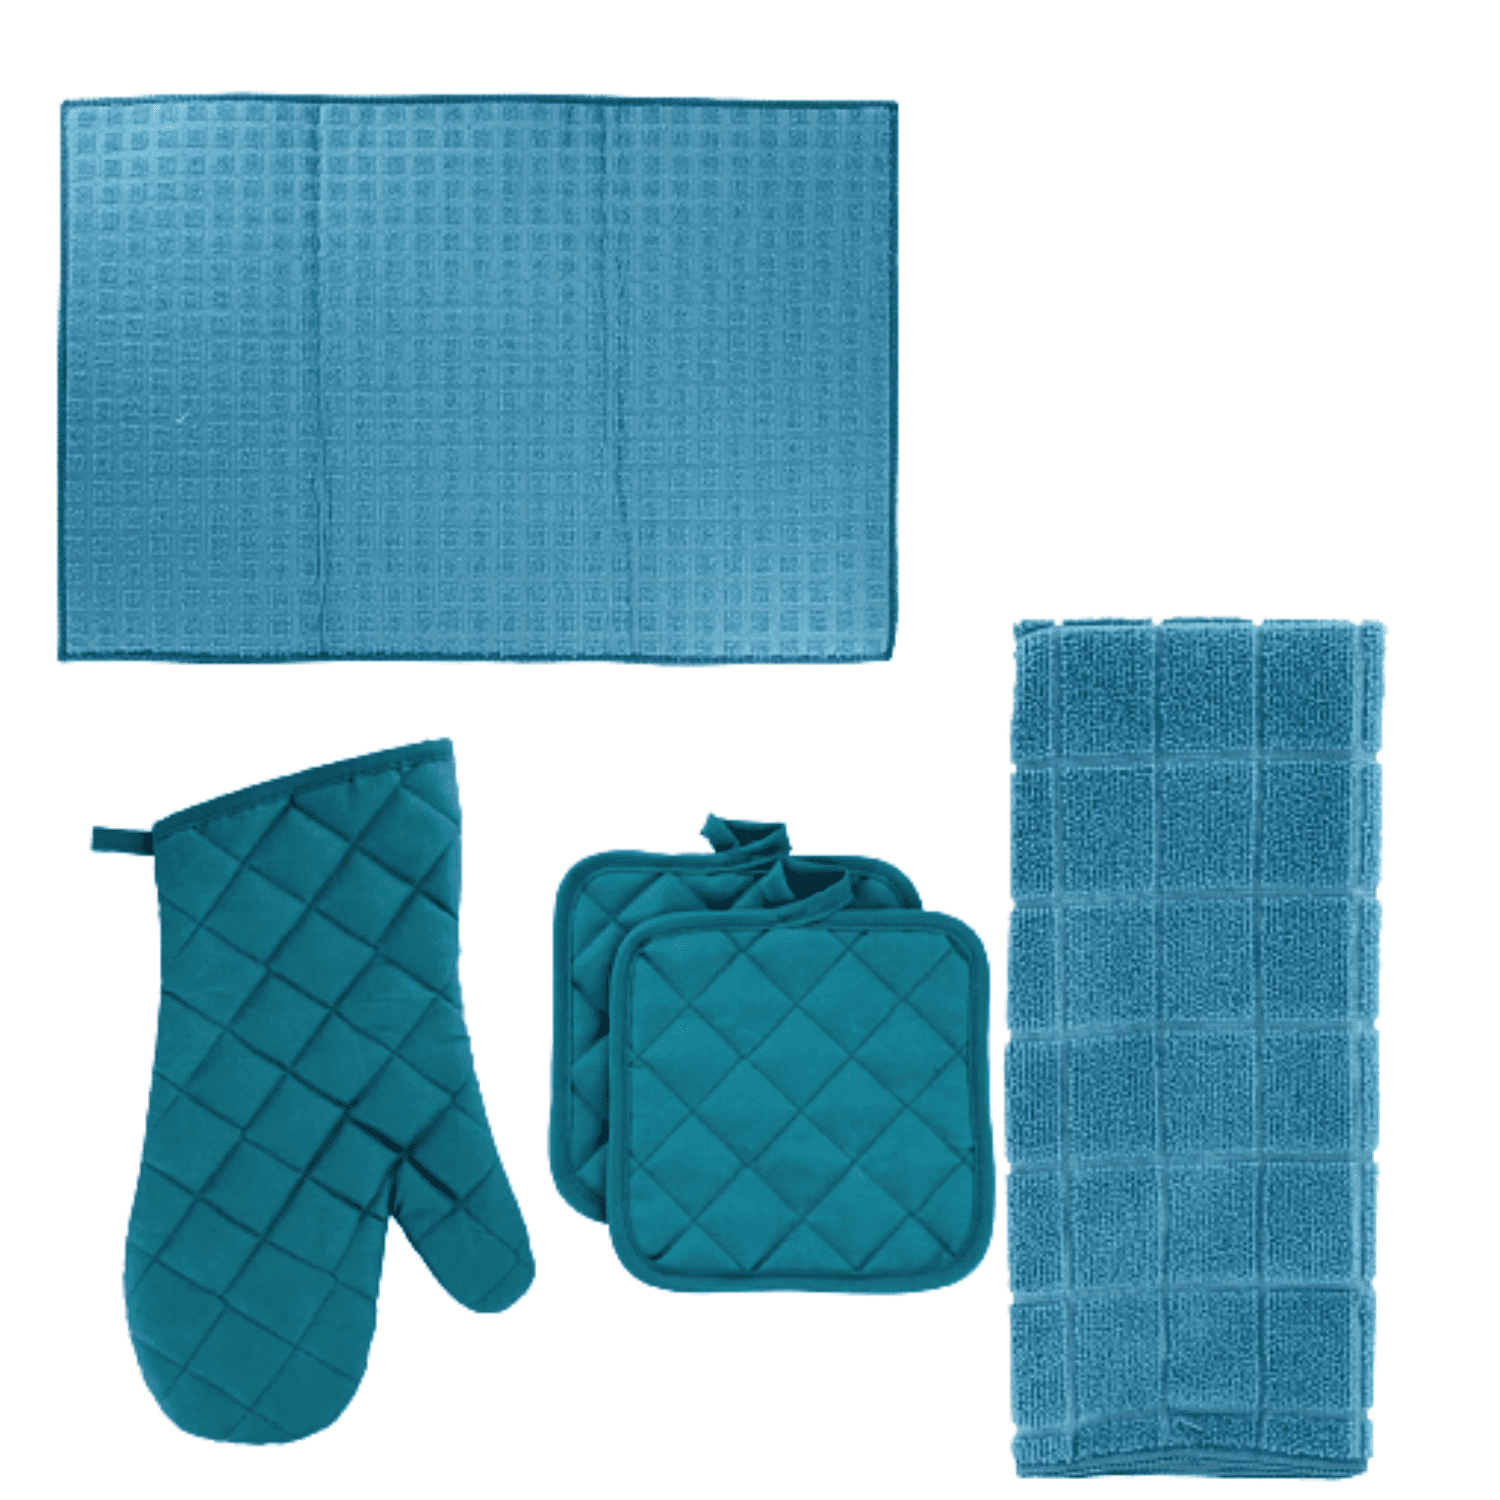 2 Pack of Turquoise or Red Cotton Kitchen Linen Quilted Stitch Oven Pot Holders 